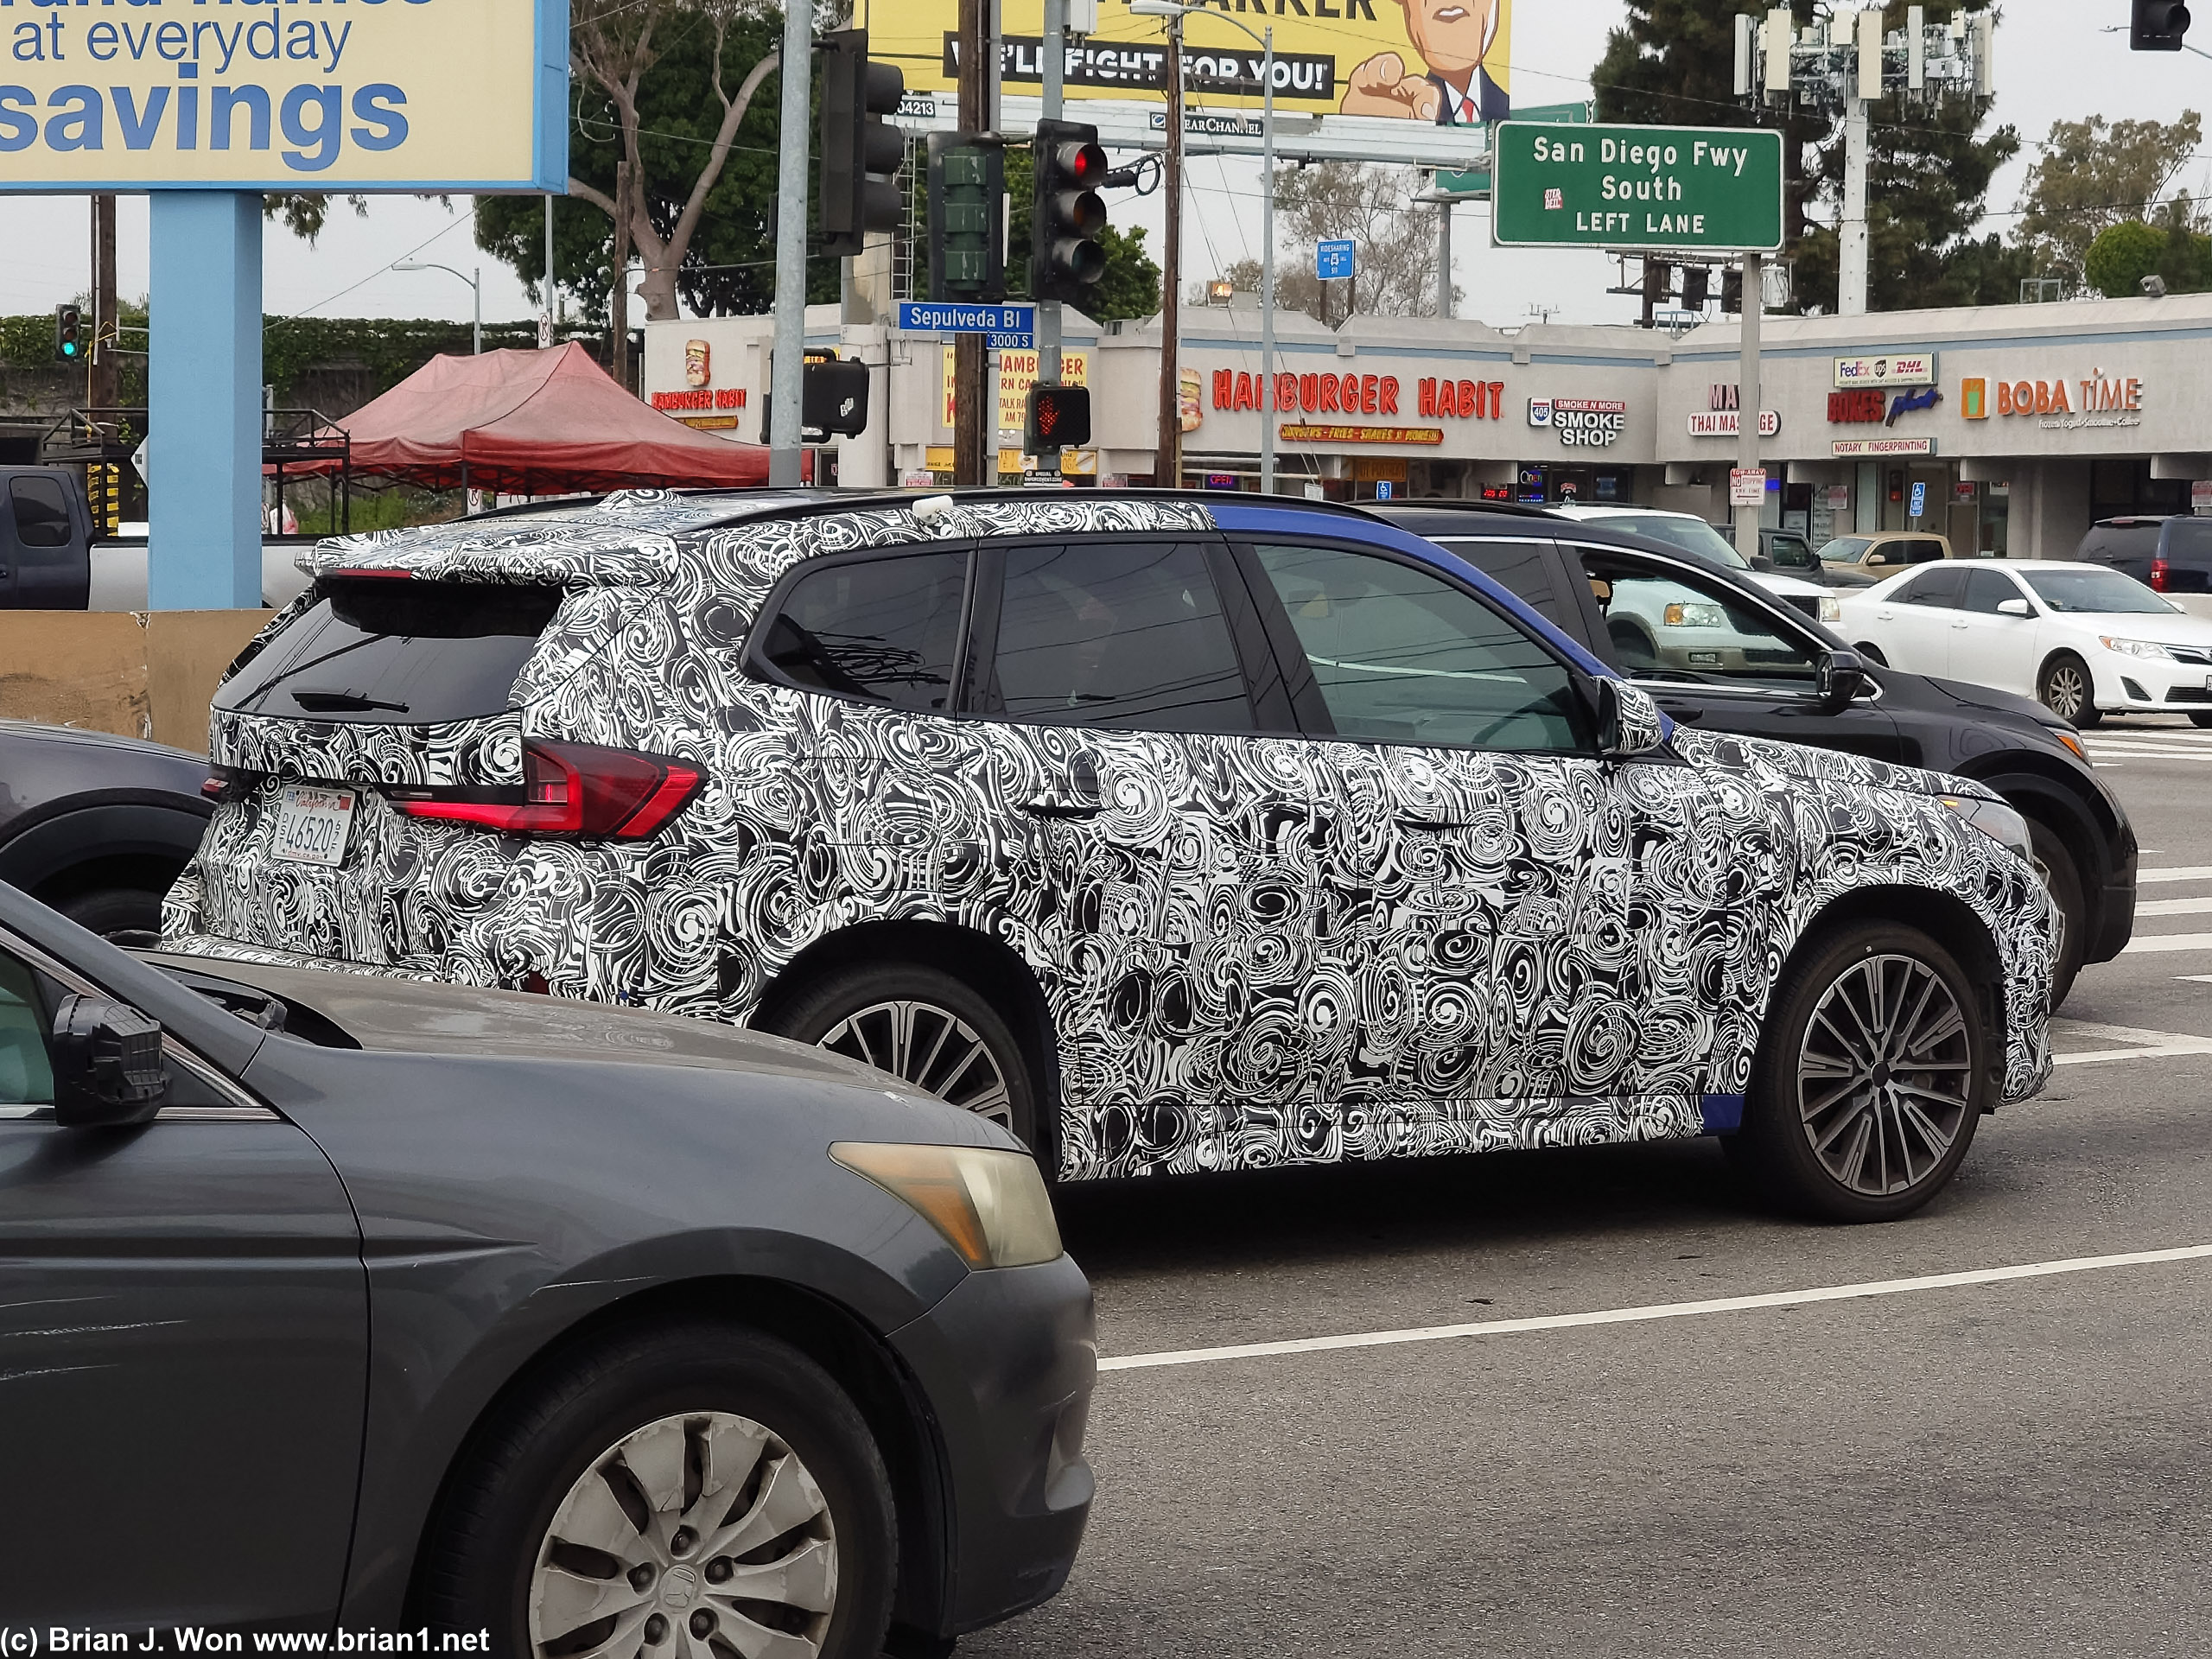 Didn't get a good look at the bumper but wondering why this BMW X1 is so camo'ed... maybe a X1 M or something?